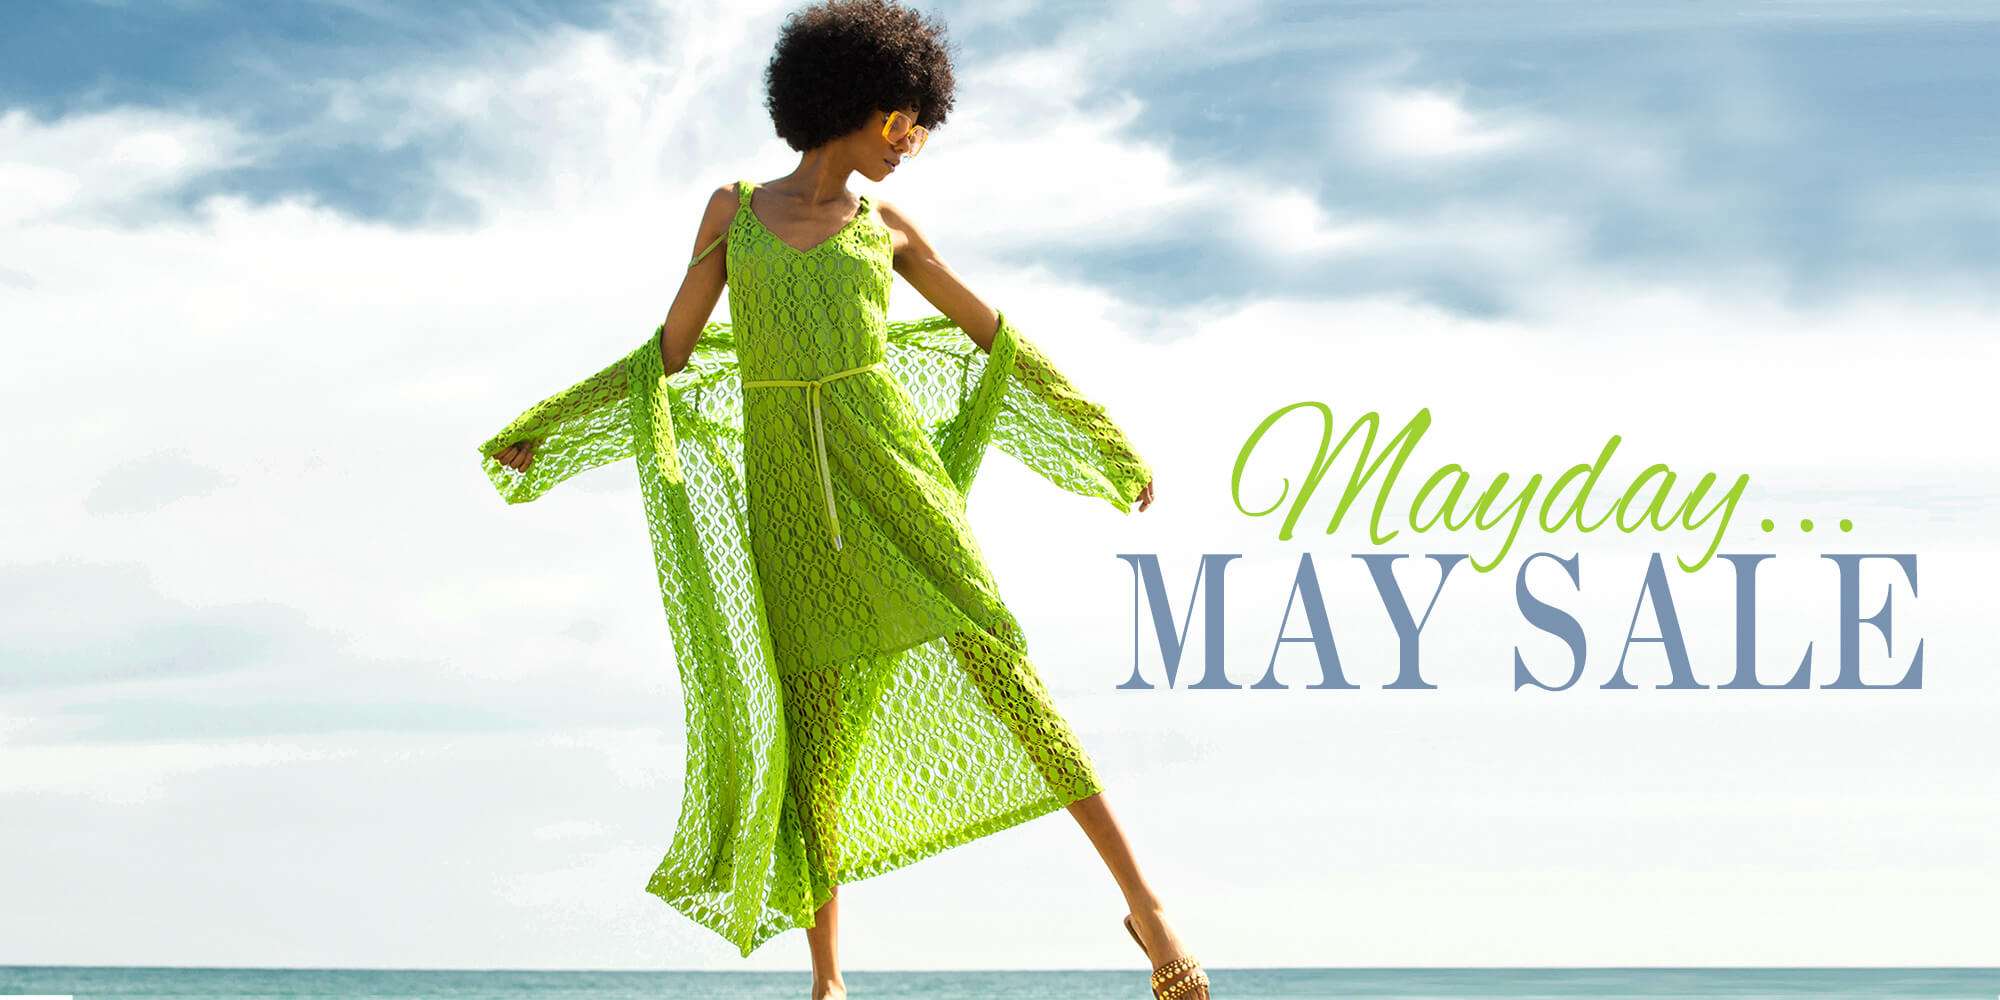 MAY DAY…MAY SALE!!!